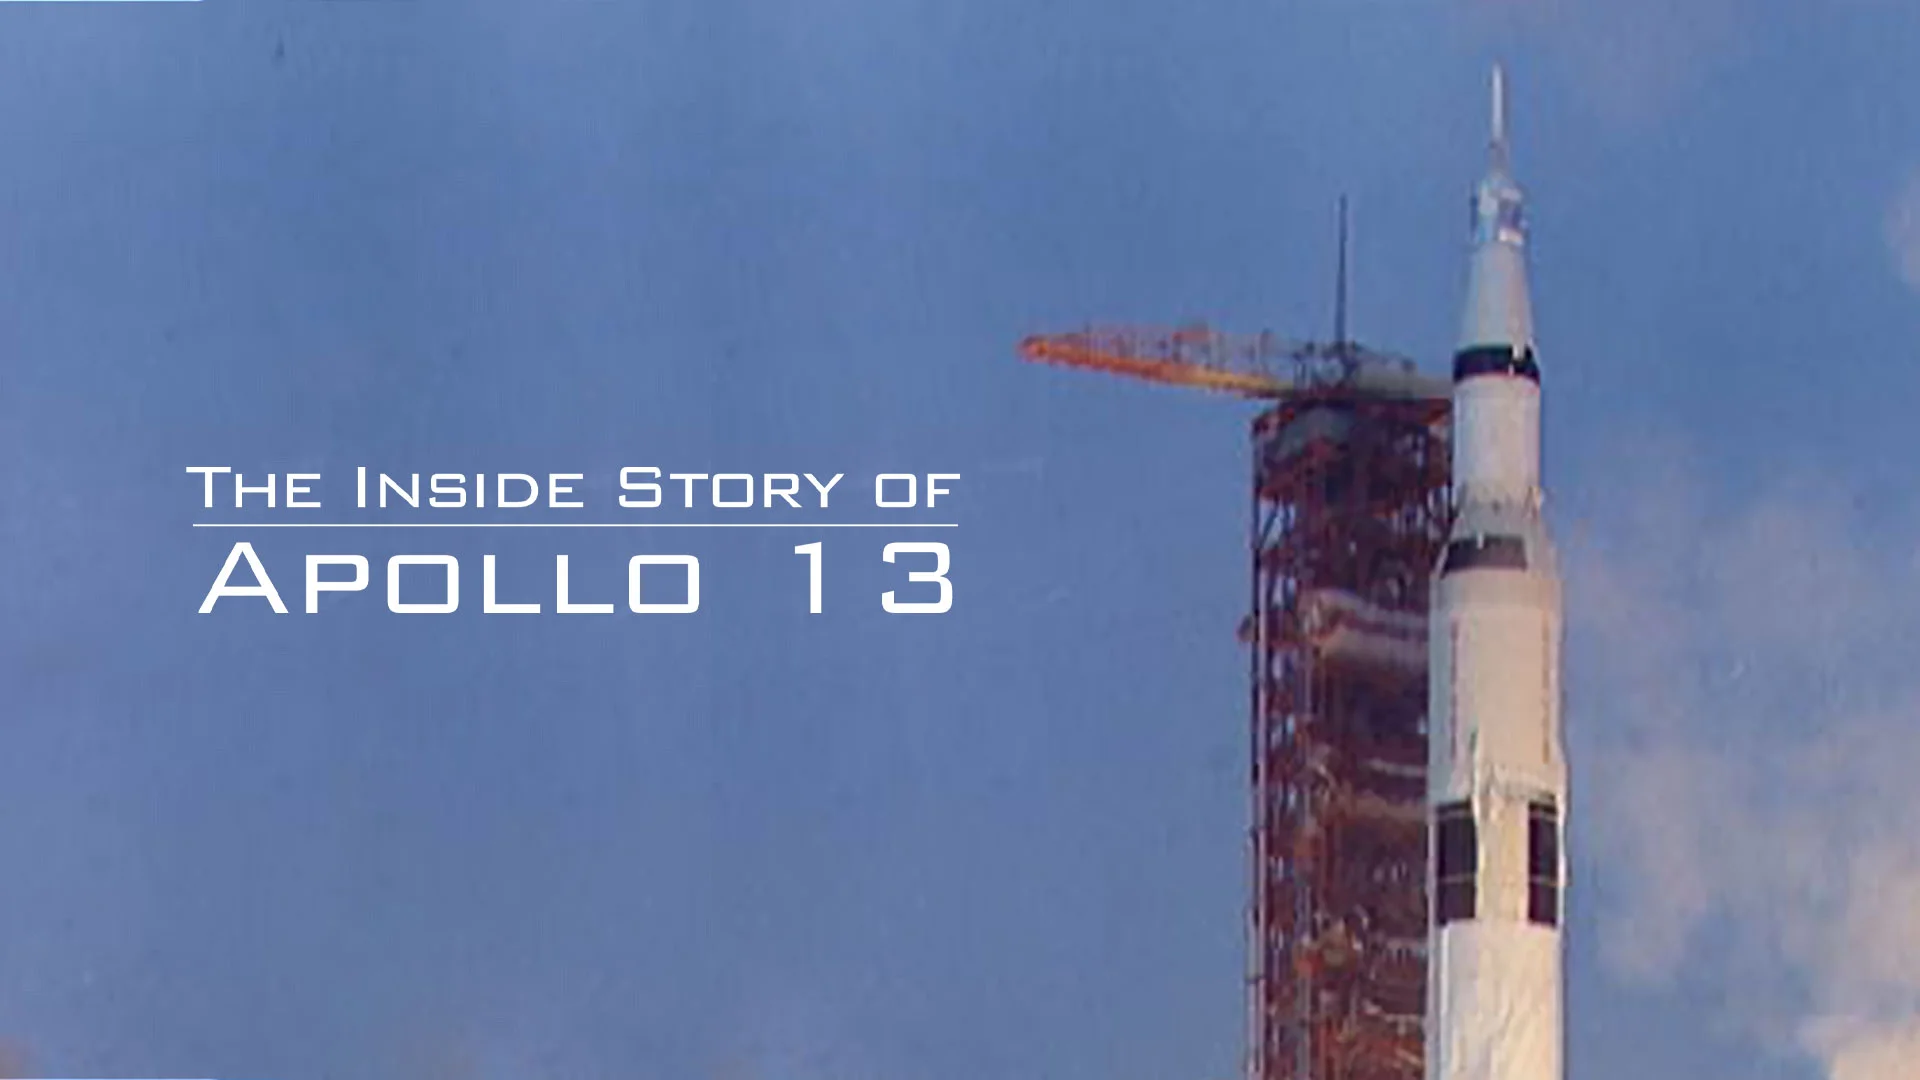 Apollo 13: The Inside Story